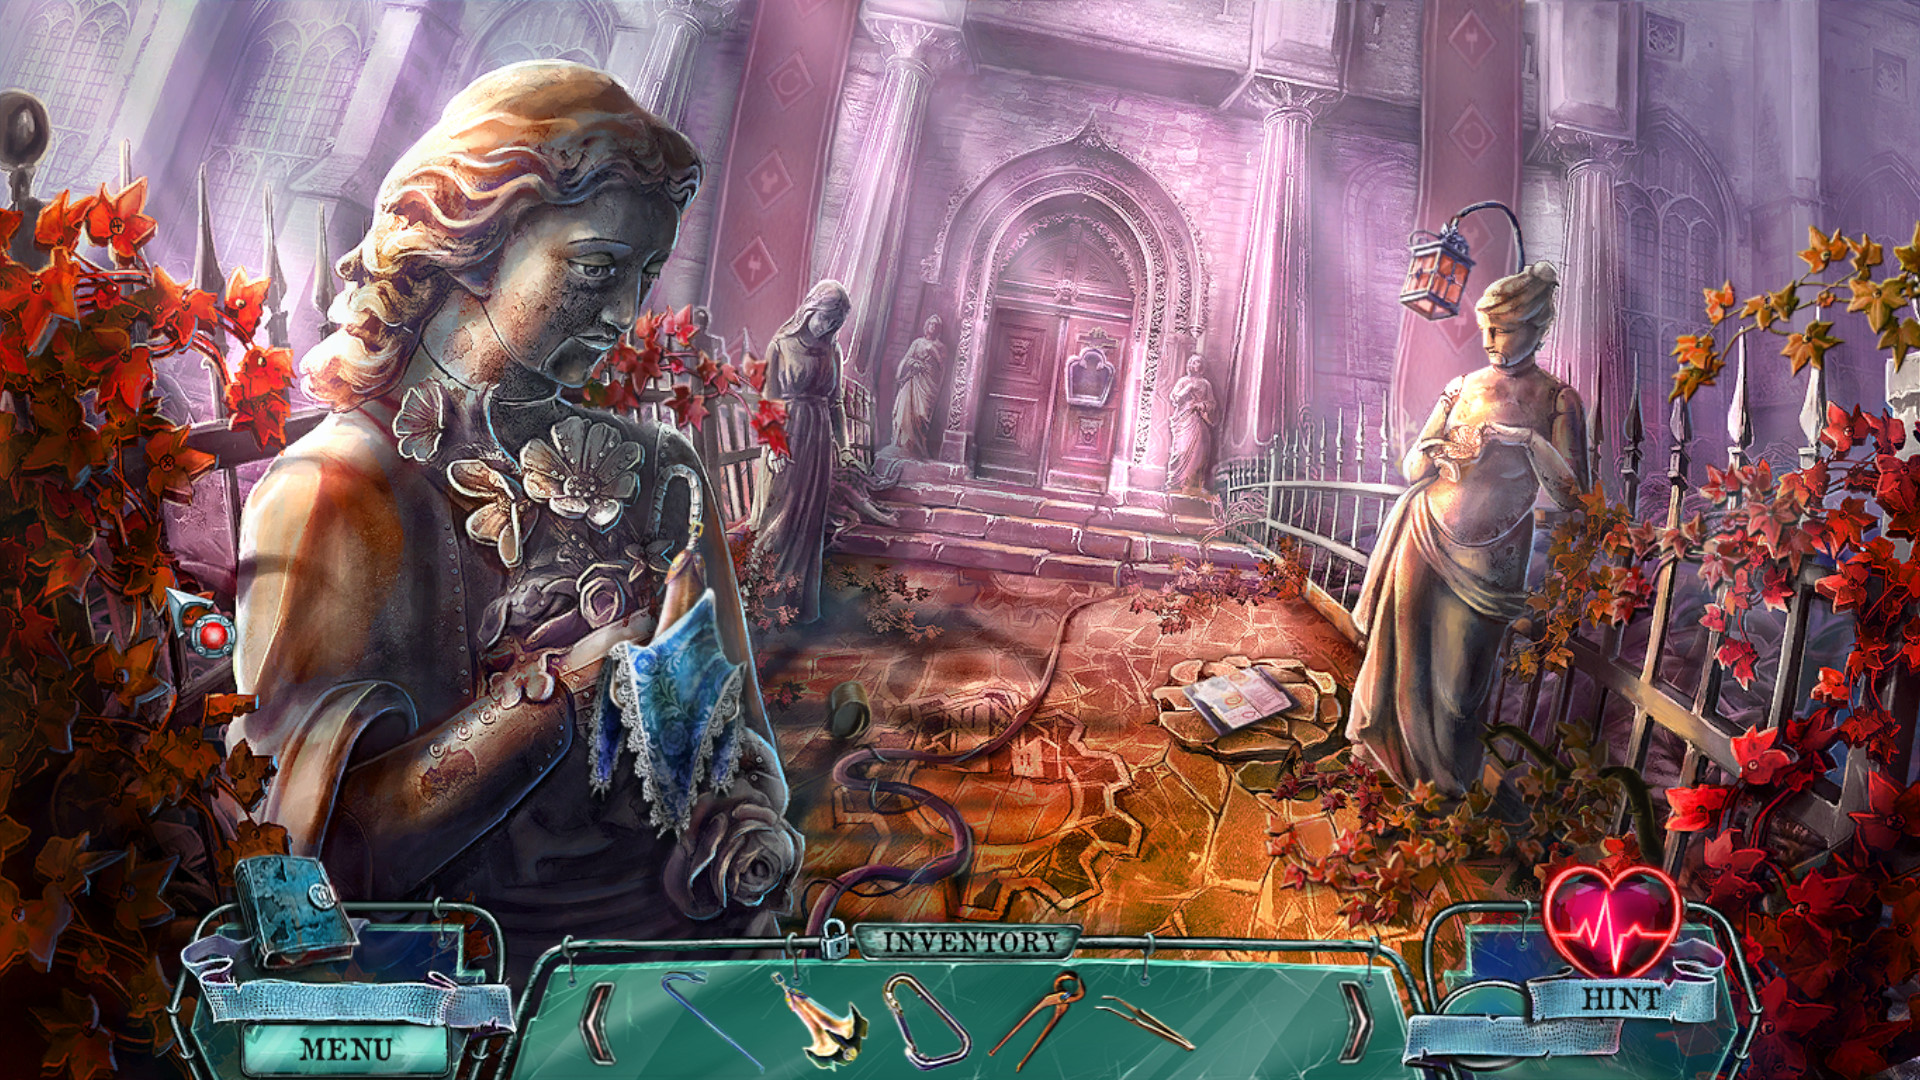 Hidden Object Games Are Mindless Fluff, And That’s Why I Love Them